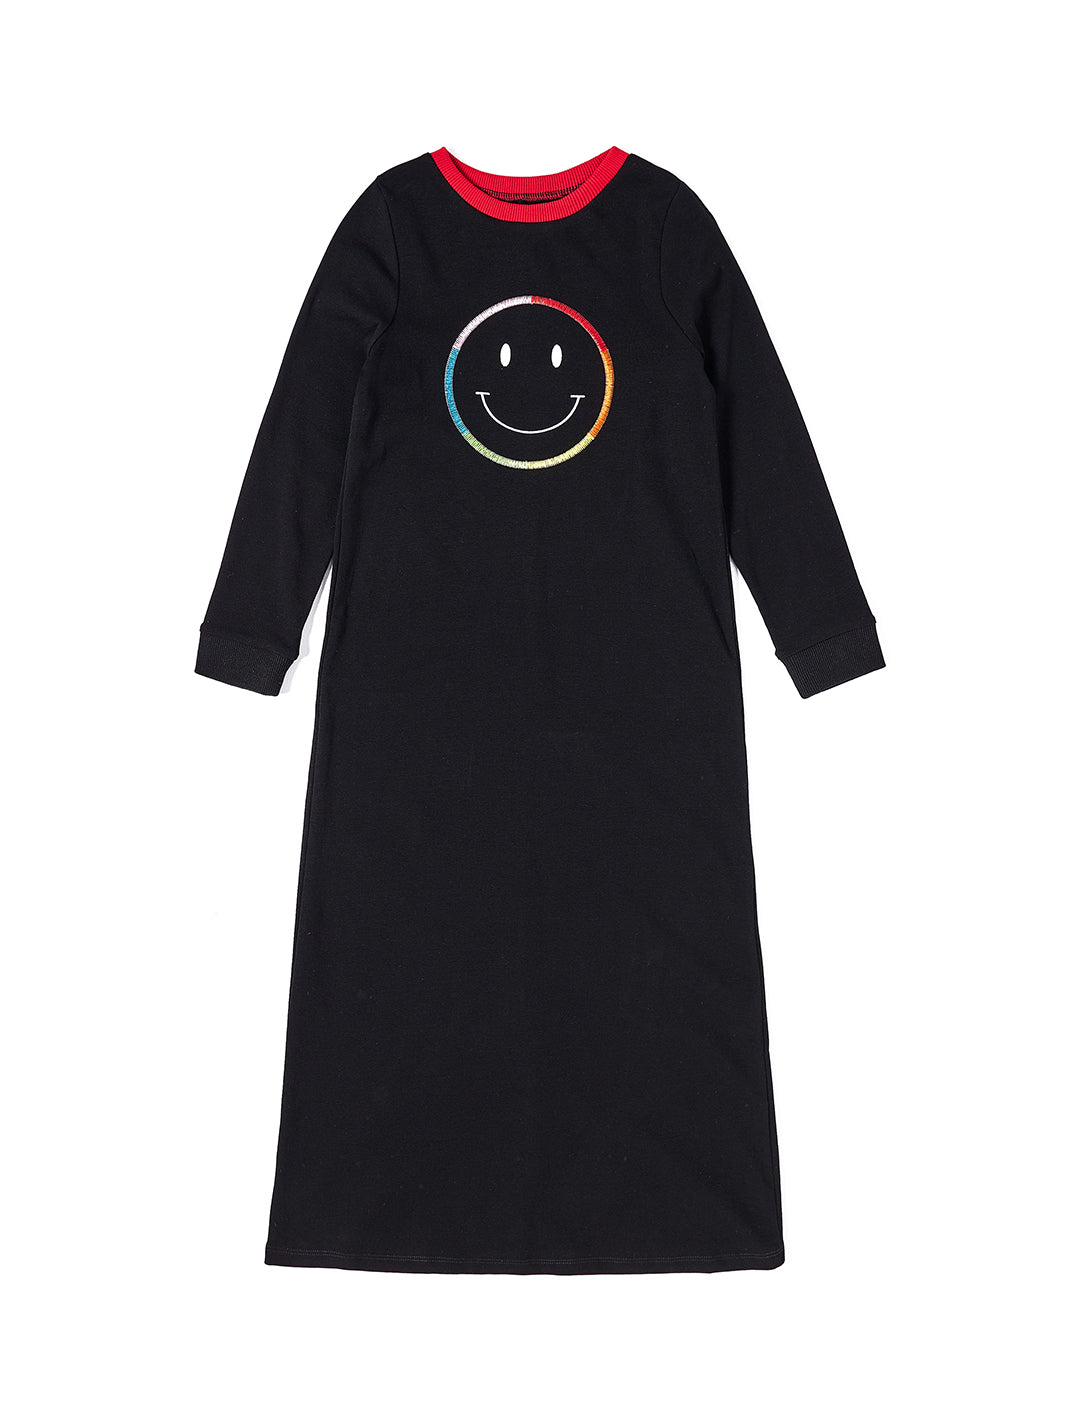 Colorful Smiley Nightgown